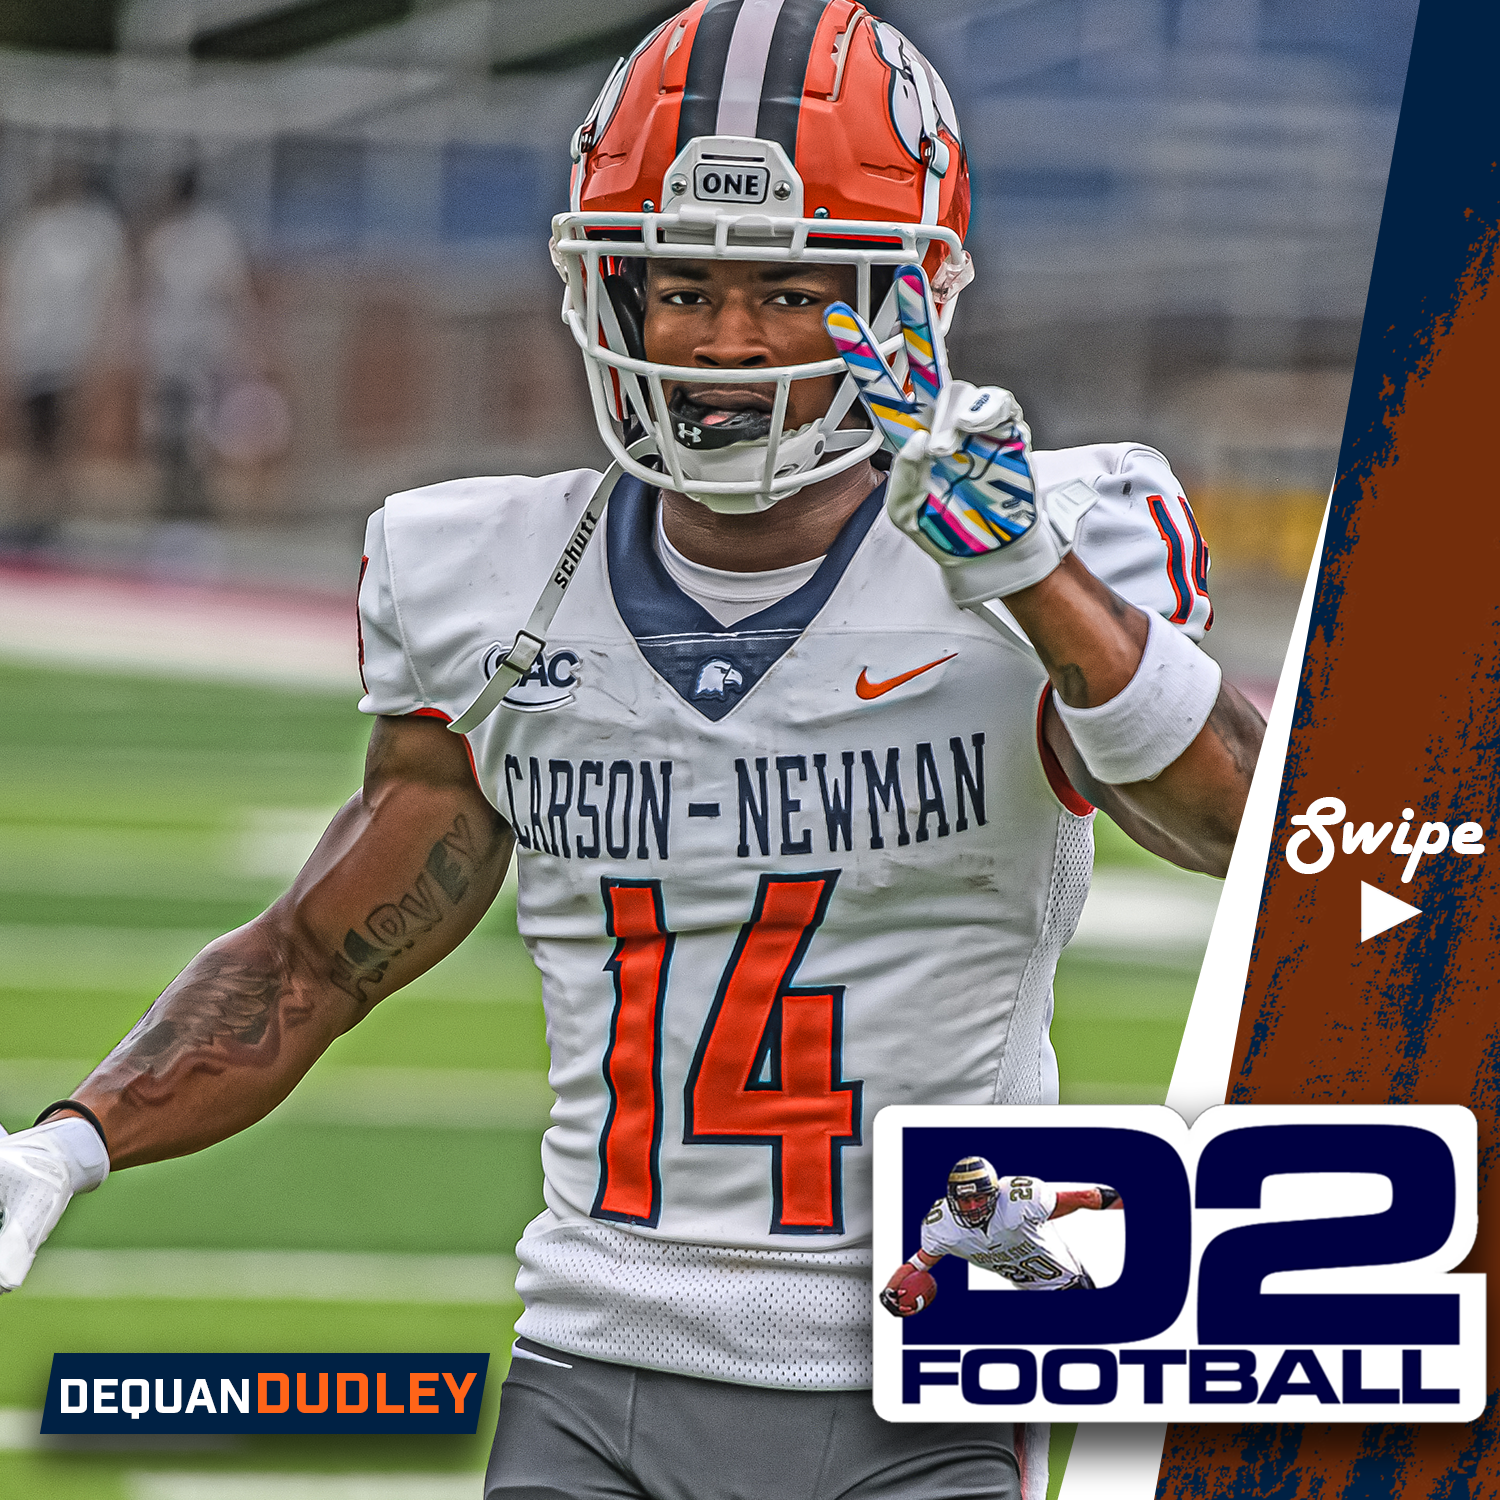 Dudley snares D2Football.com National Special Teams Player of the Week